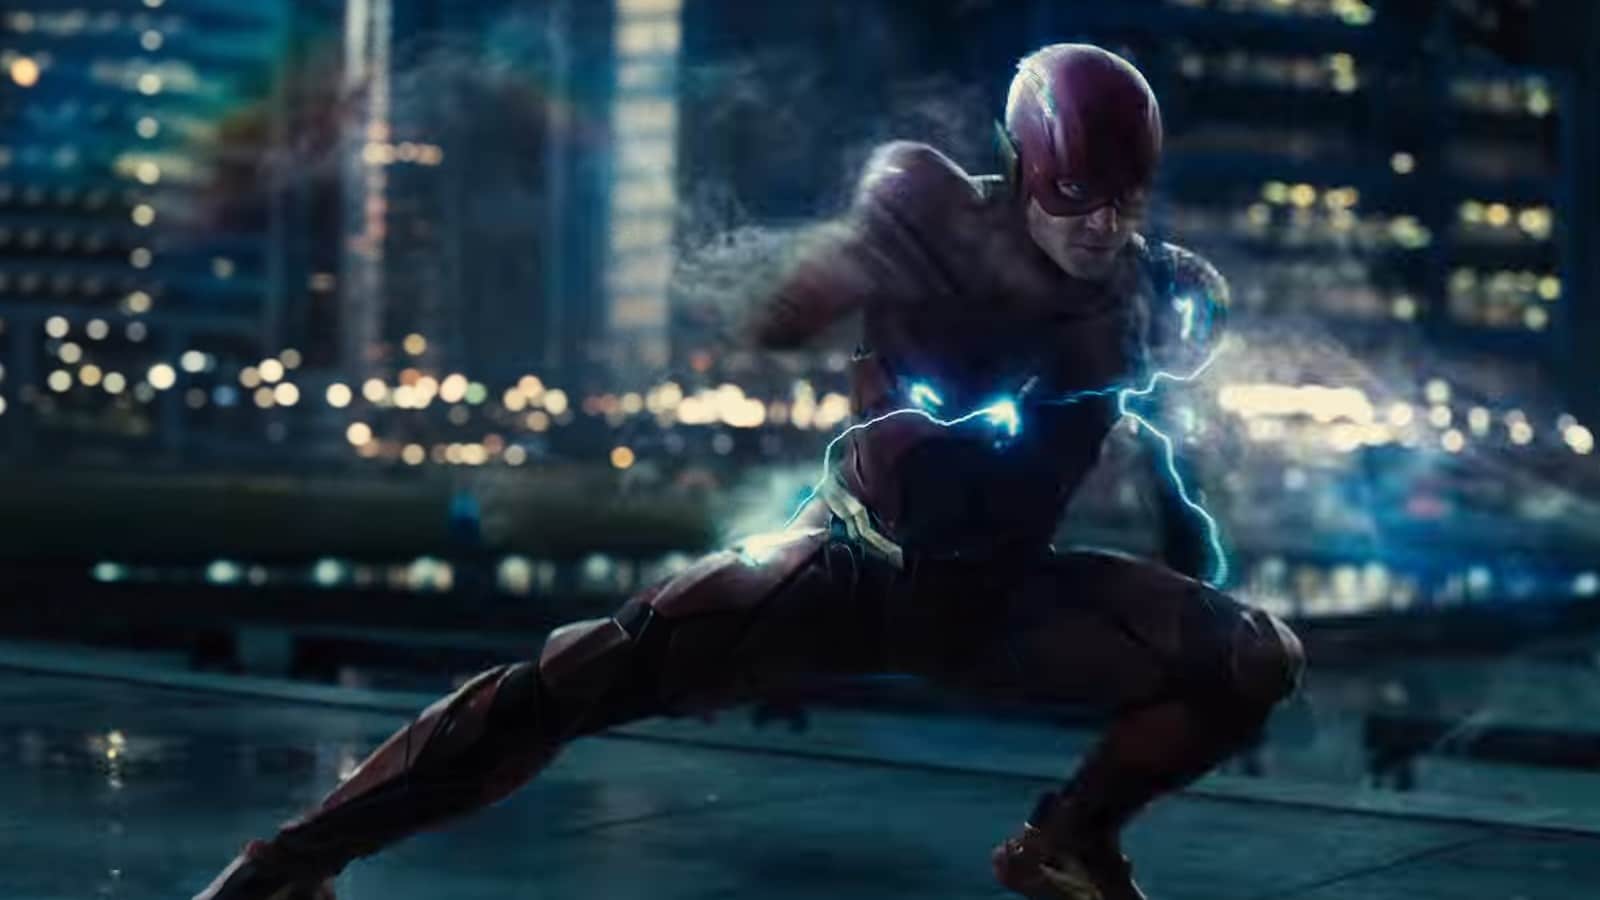 Despite their legal issues, Ezra Miller is still set to star in The Flash